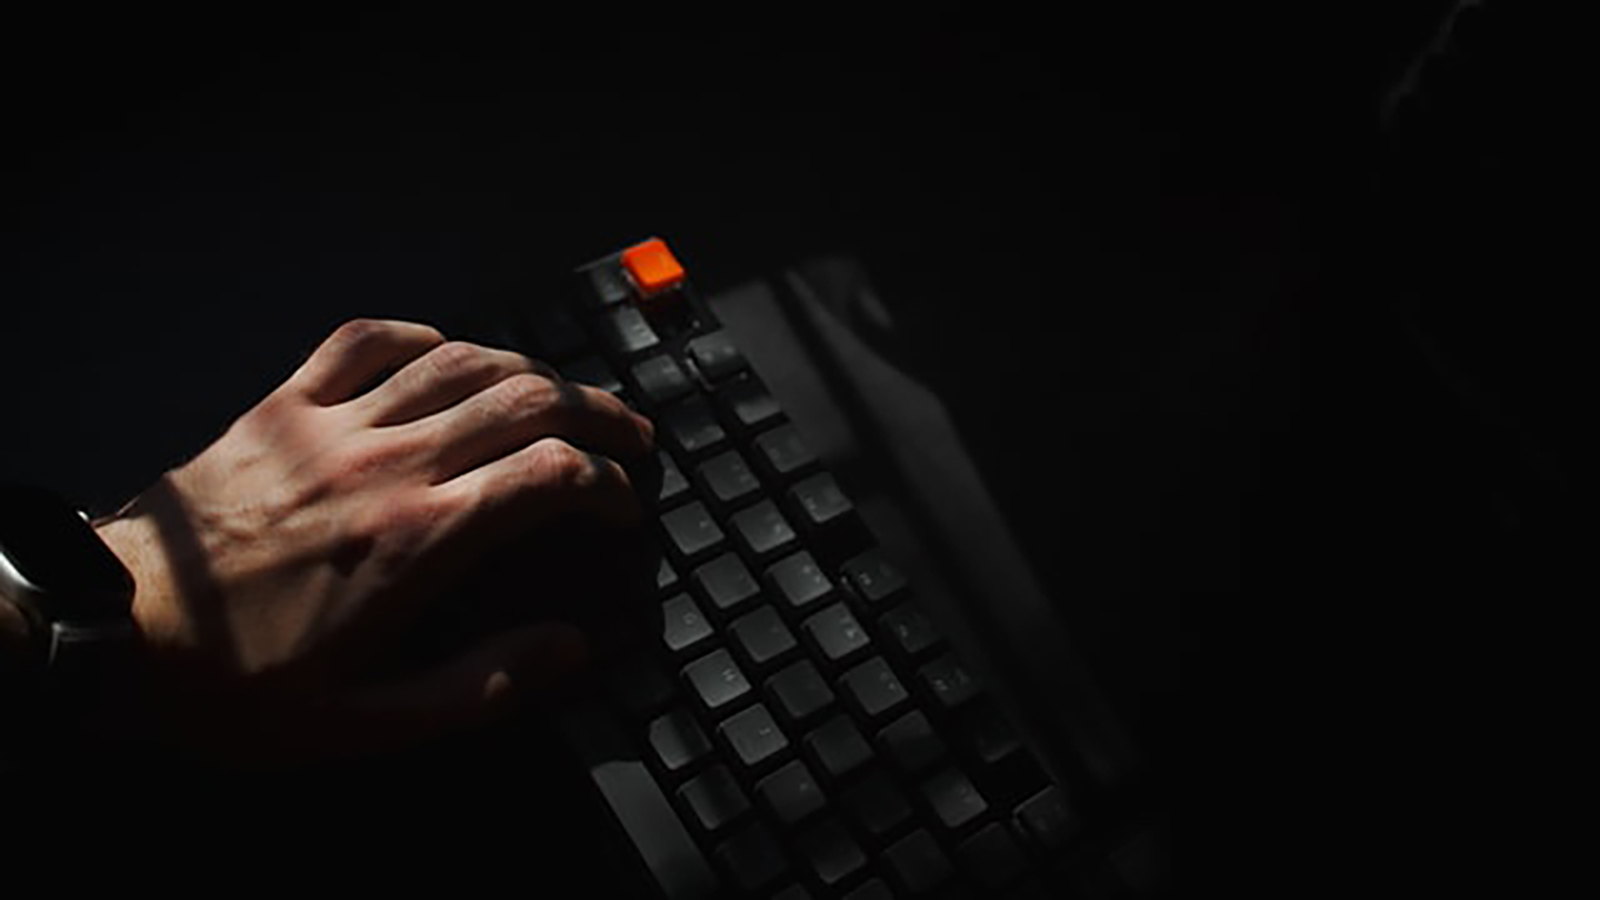 Hands typing at a keyboard in a dimly lit room. There is something sinister about the image.